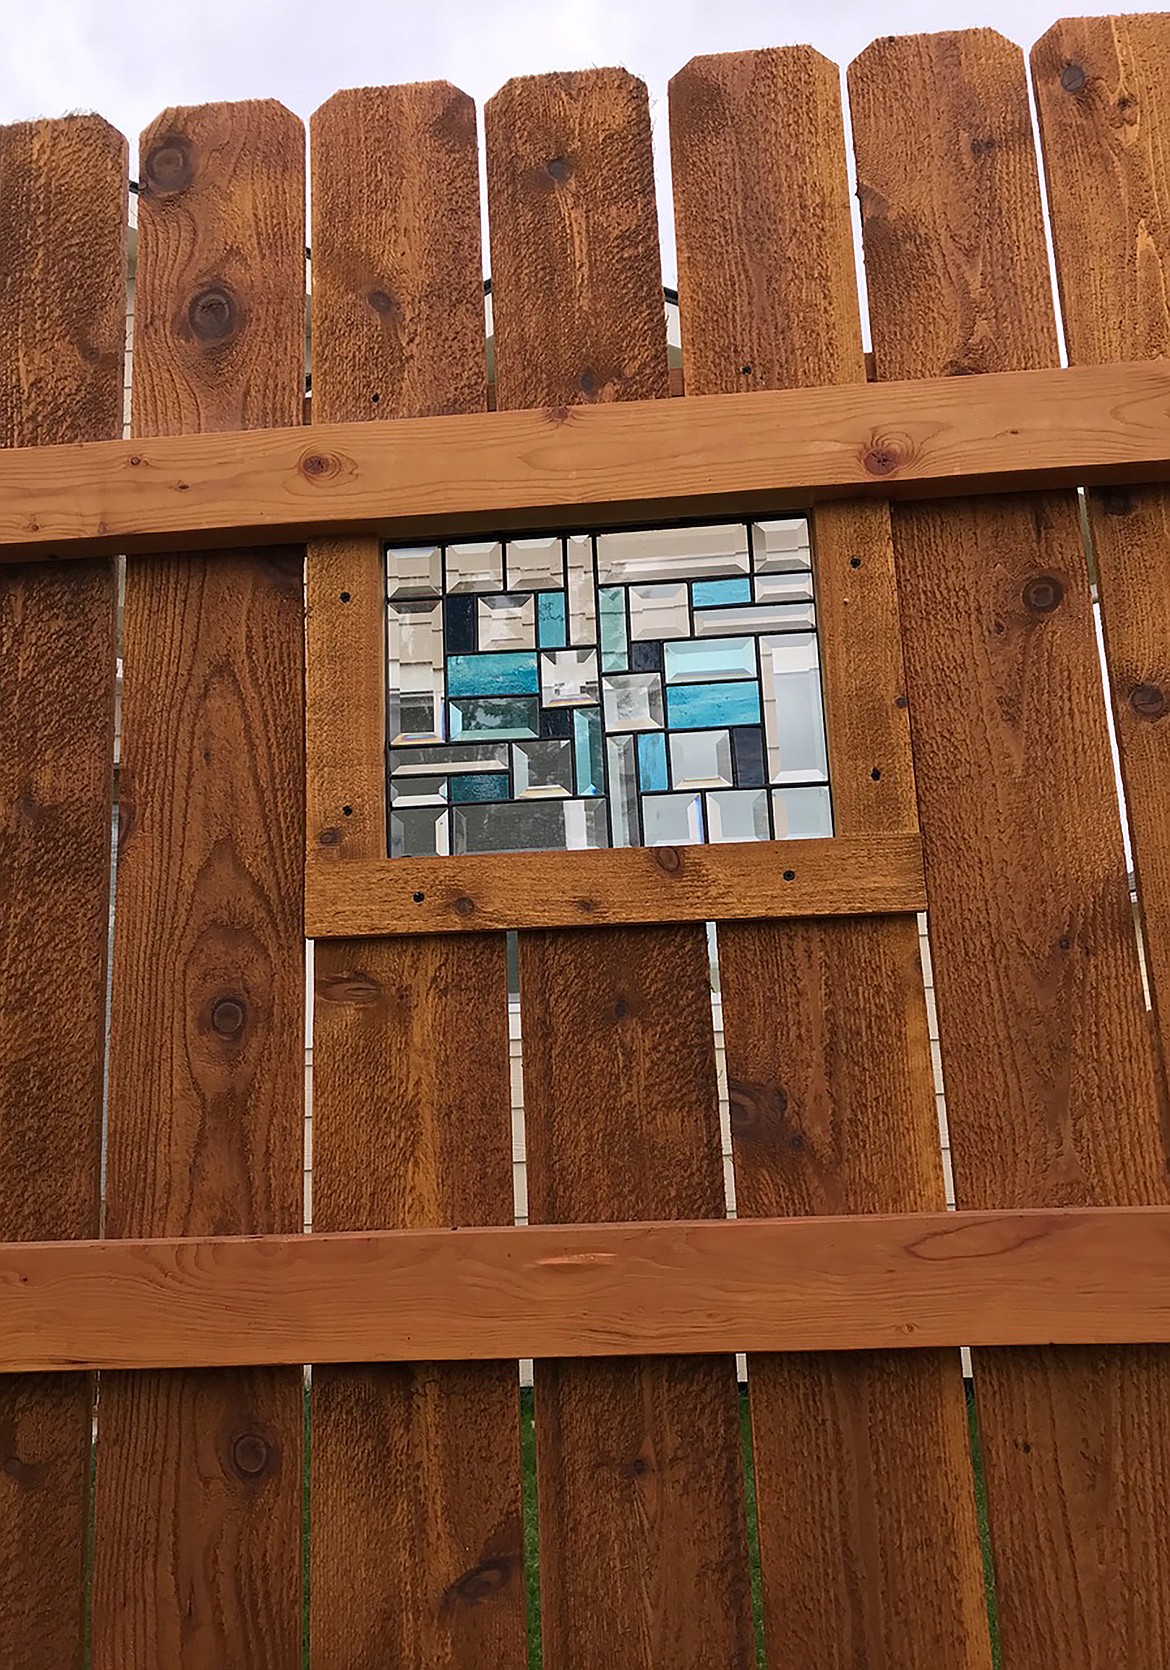 A close-up view of a fence on northwestern side of Sandpoint that features stained glass panels.